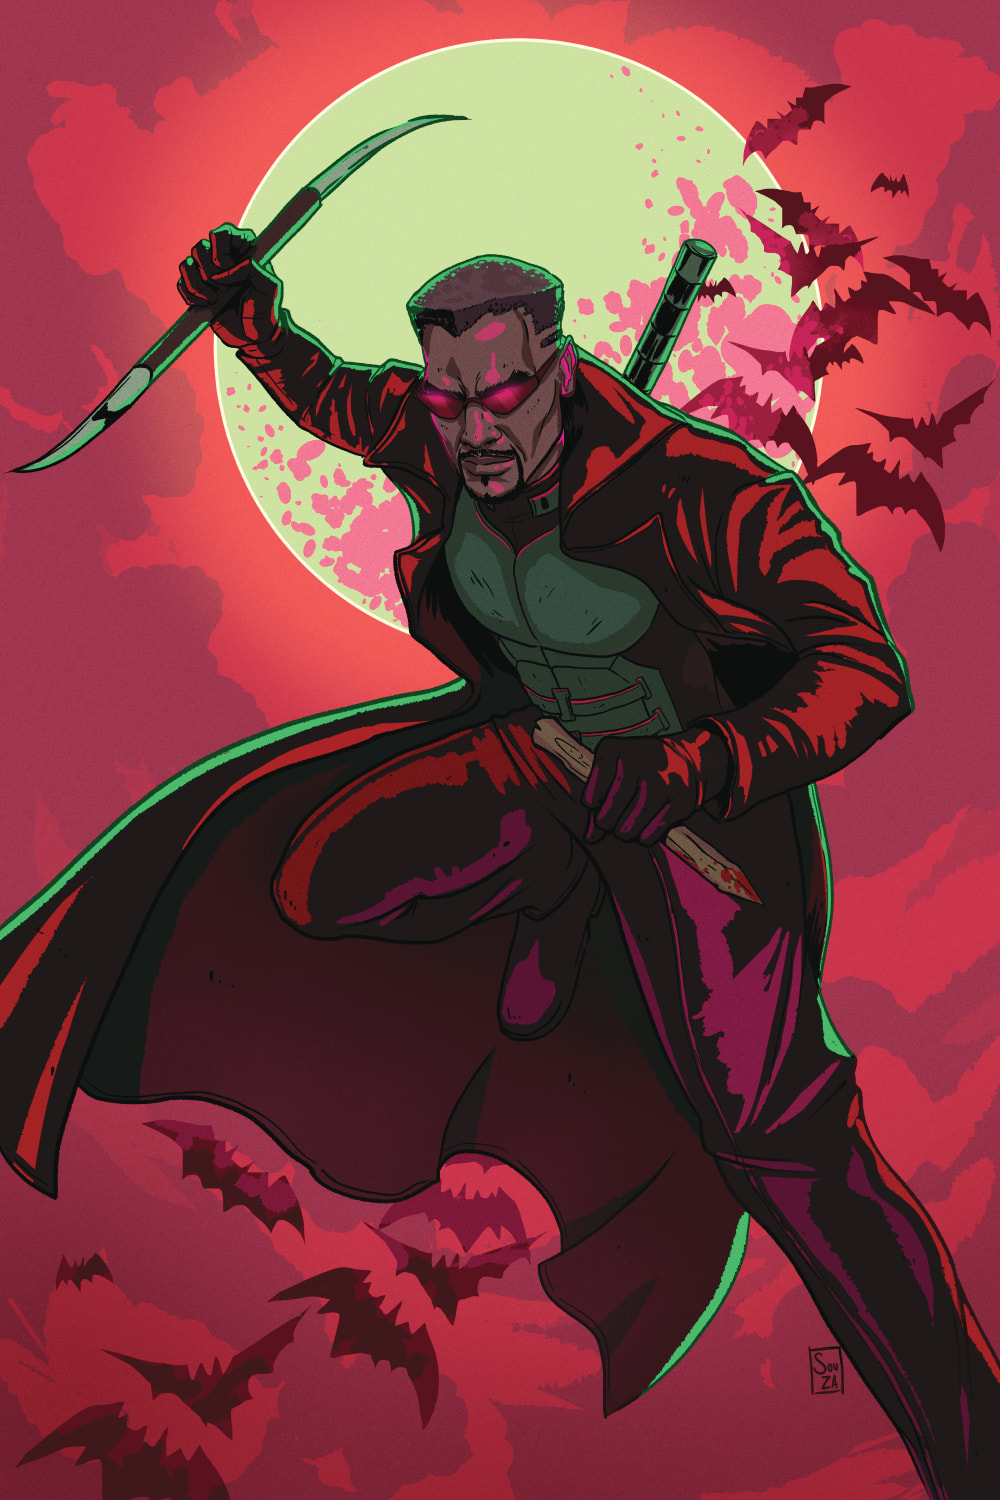 BLADE (Movies, Comic Book Character)